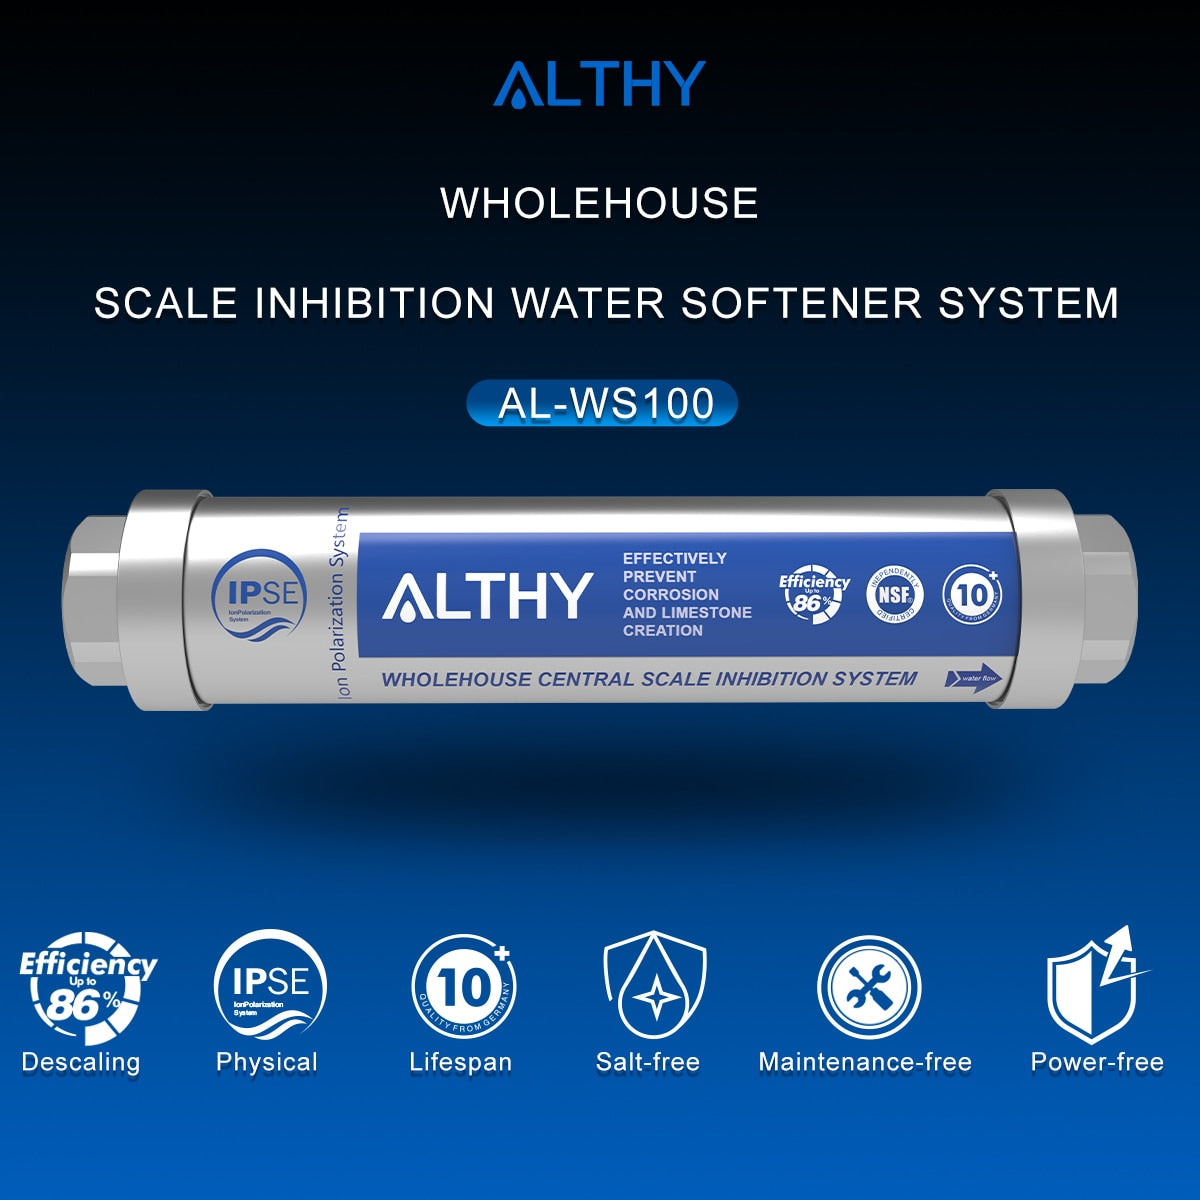 ALTHY AL-WS100 IPS Whole House Scale Inhibition Water Softener Machine System Descaler  Anti Limescale Corrosion & Hard water  Hardware > Plumbing > Water Dispensing & Filtration 437.42 EZYSELLA SHOP